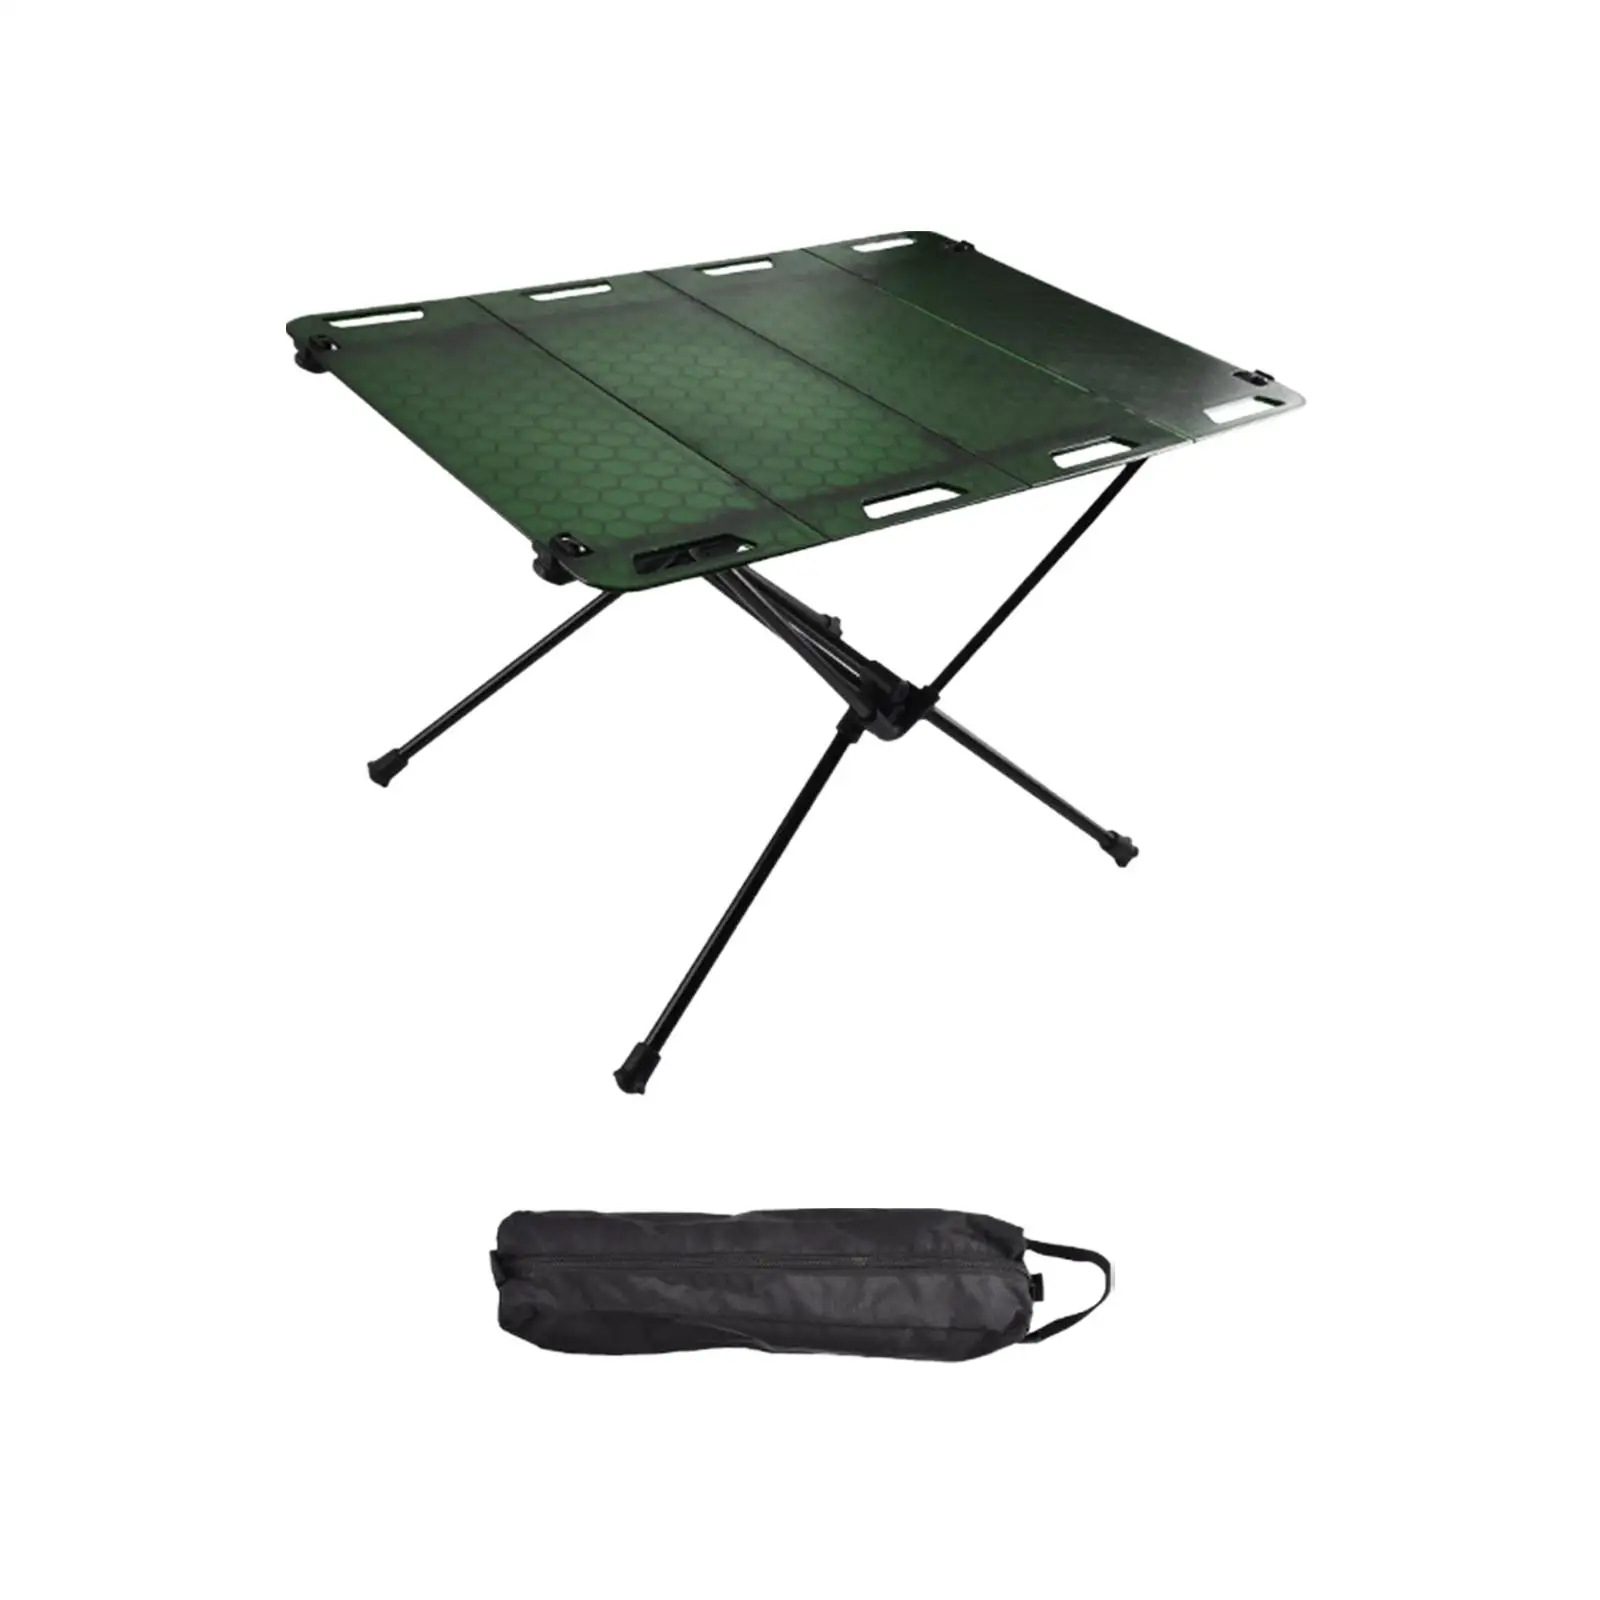 Folding Camping Table, Camping Desk with Hole for Hanging, Outdoor Foldable Table Beach Table, for Backpacking Backyard Hiking